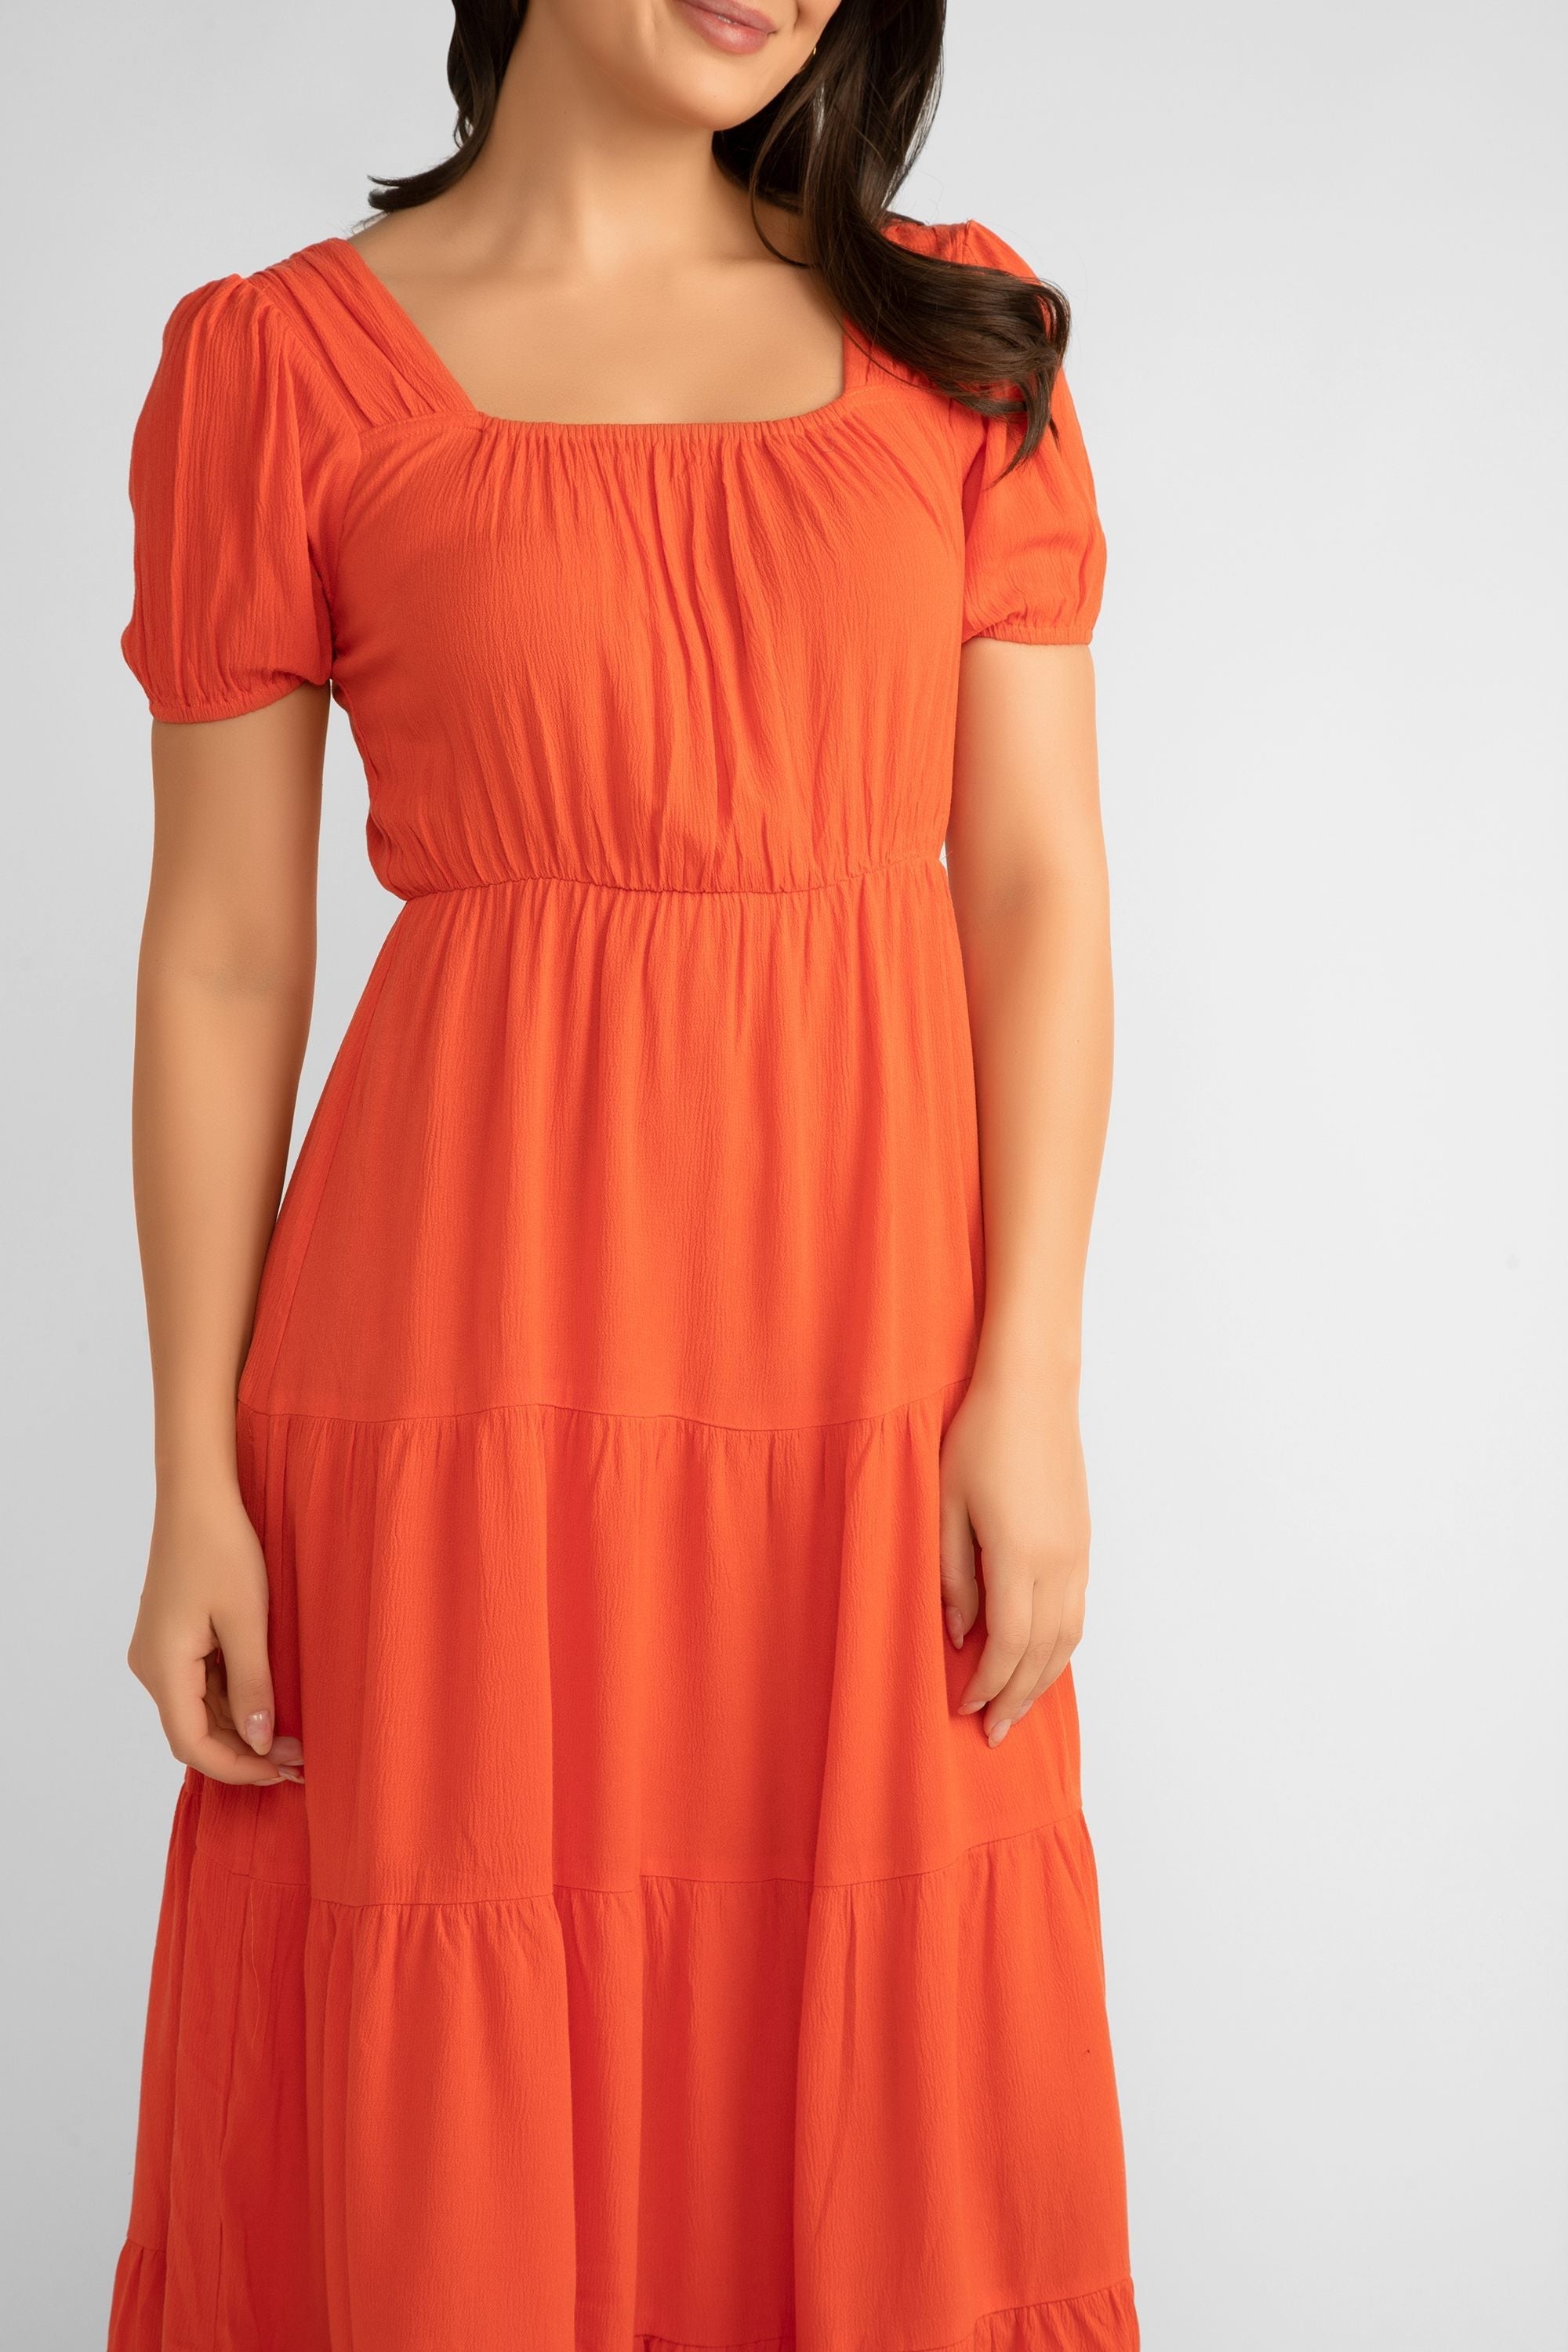 Front close up of Pink Martini (DR-230524) Women's Square Neck, Short Puff Sleeve Tiered Midi Dress in Orange